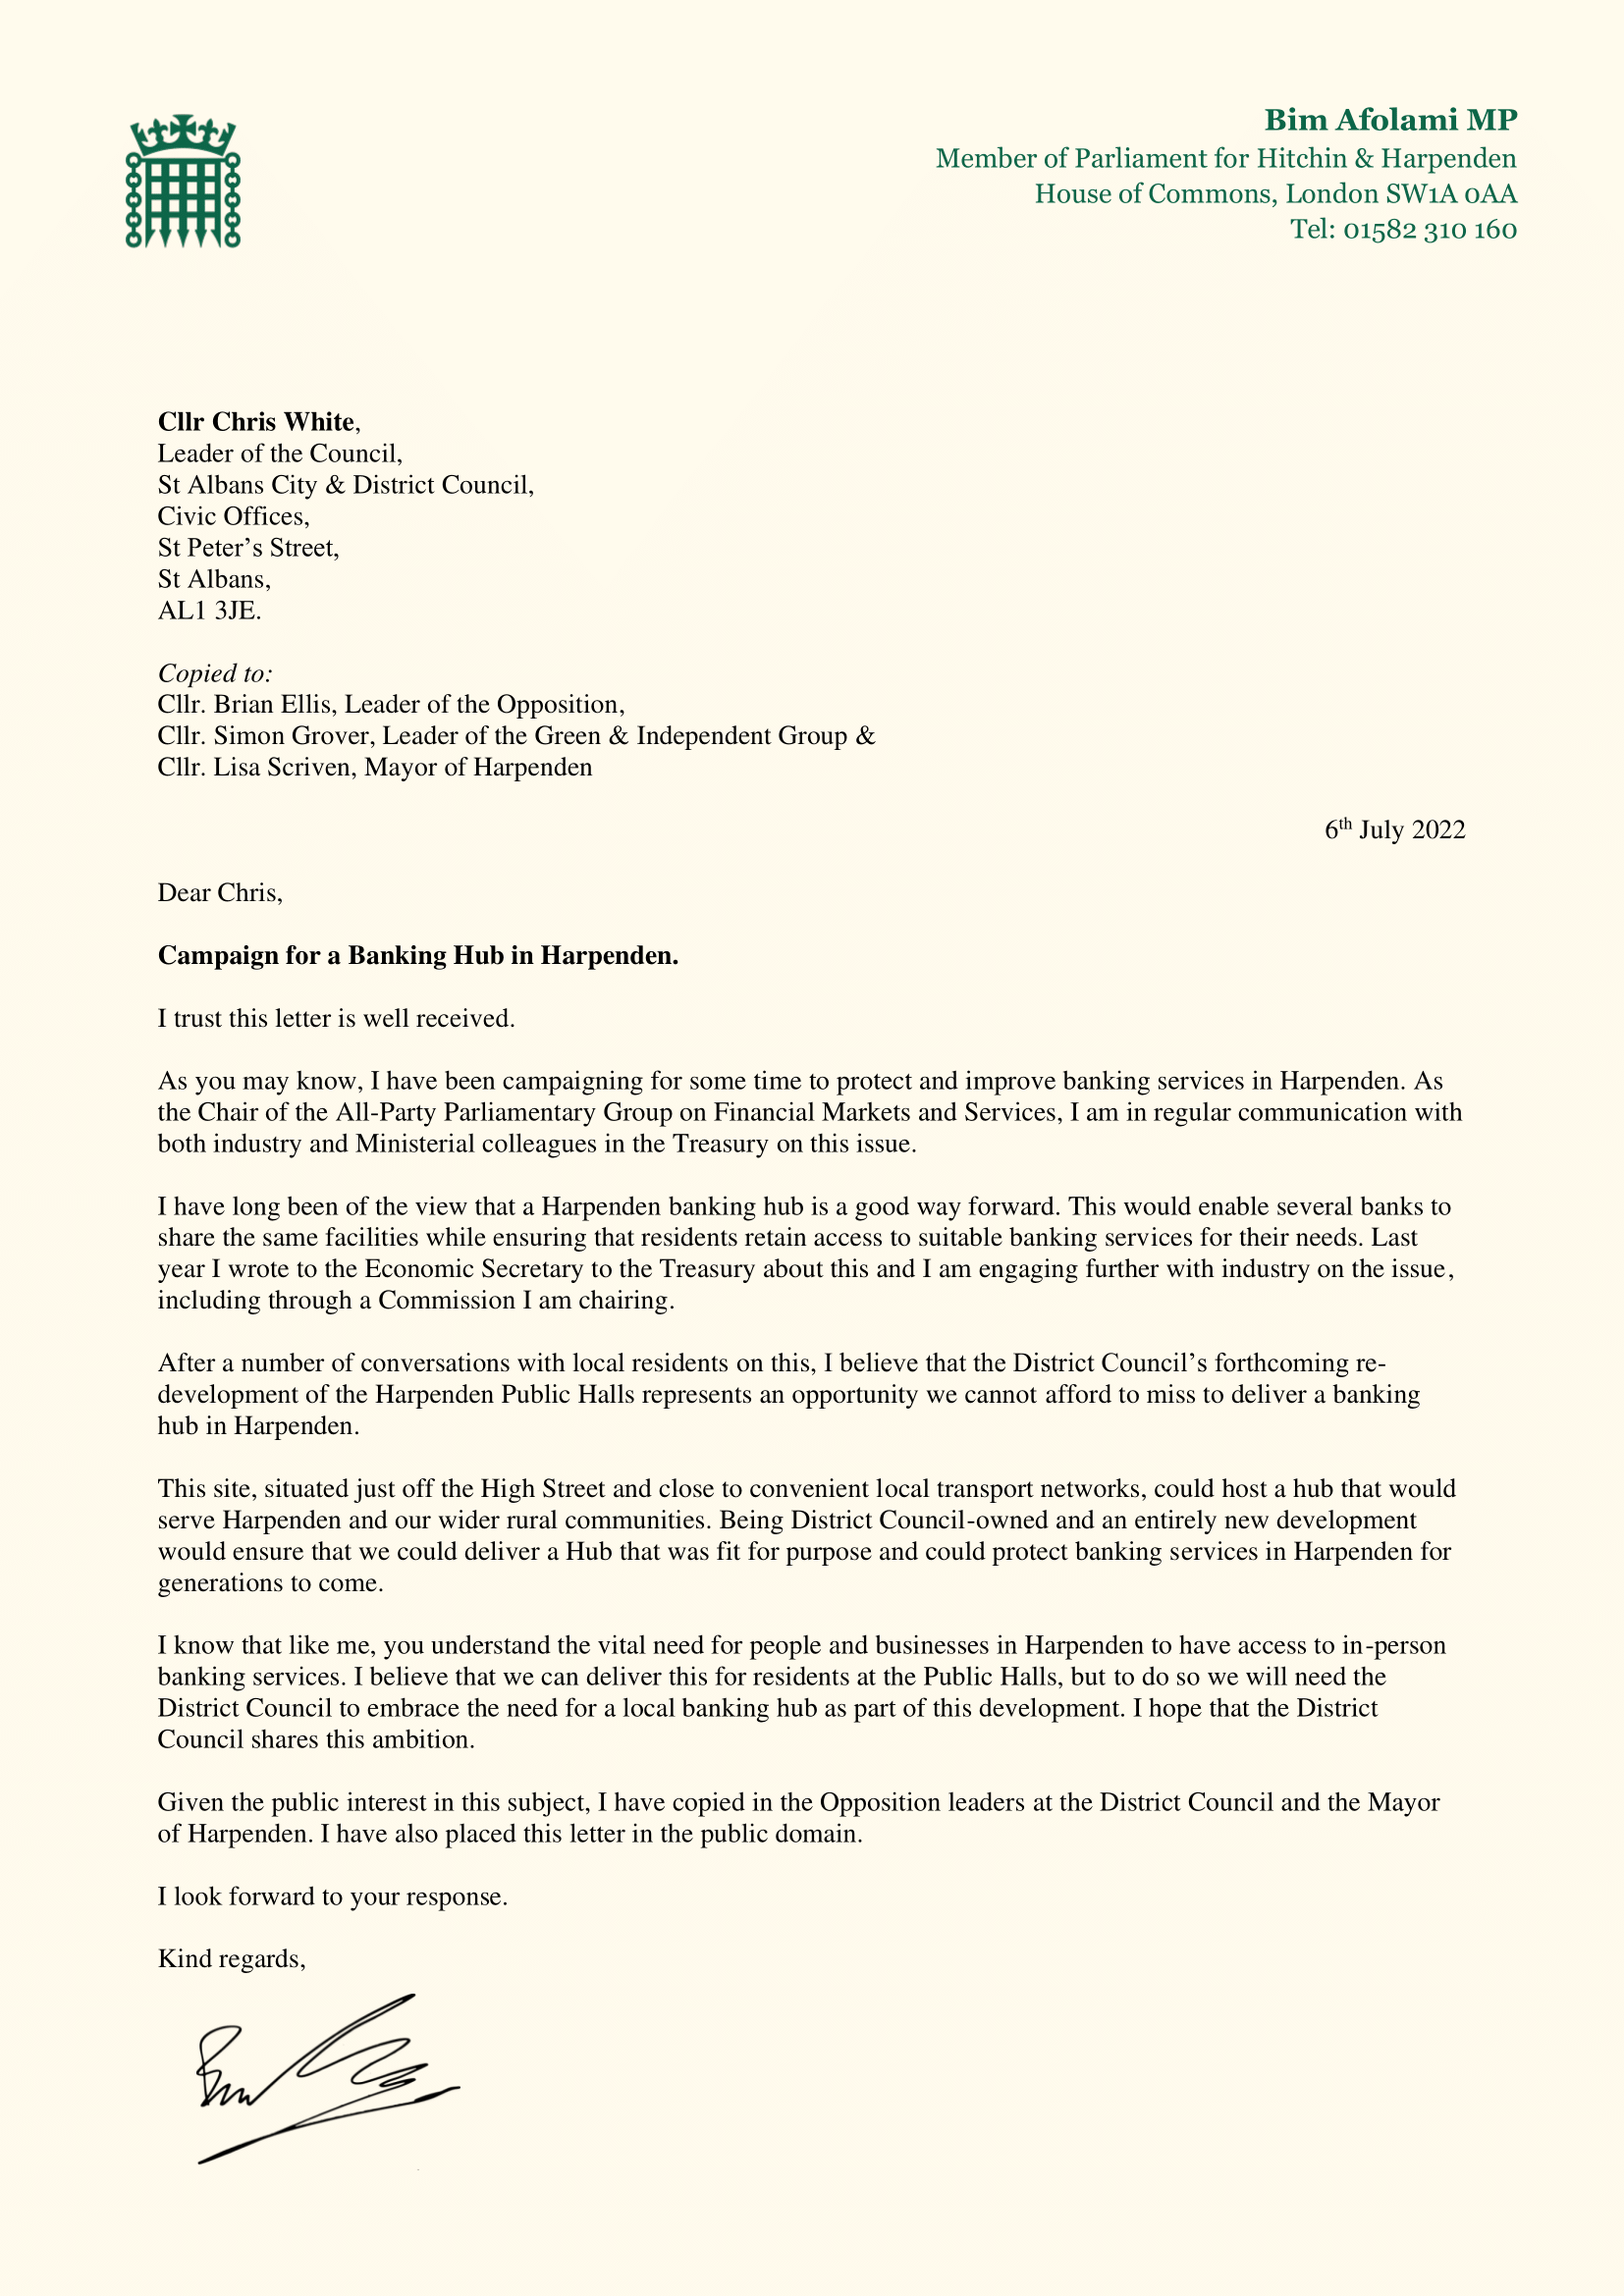 Letter to the Leader